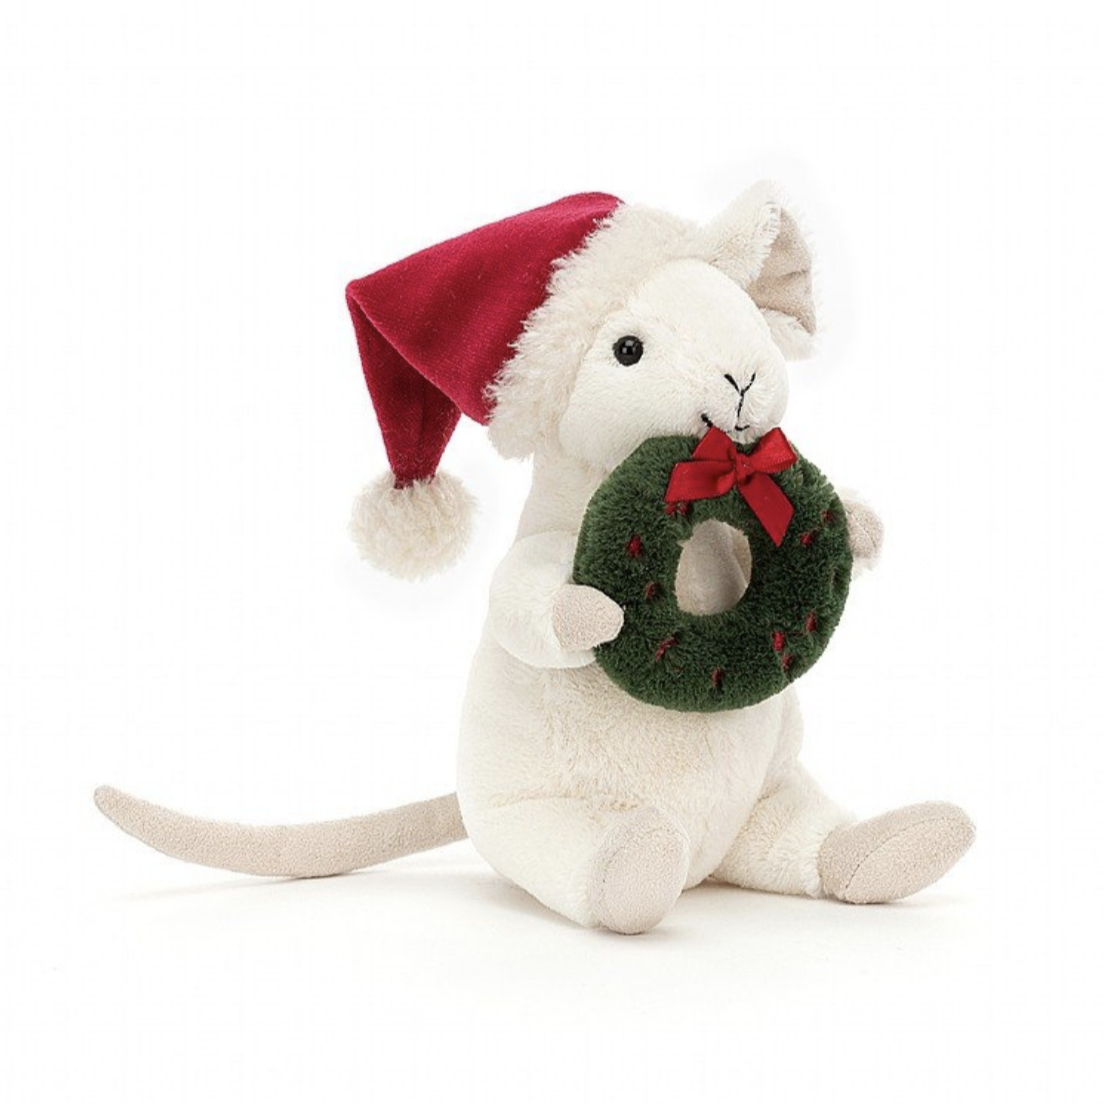 Jellycat Merry Mouse Wreath